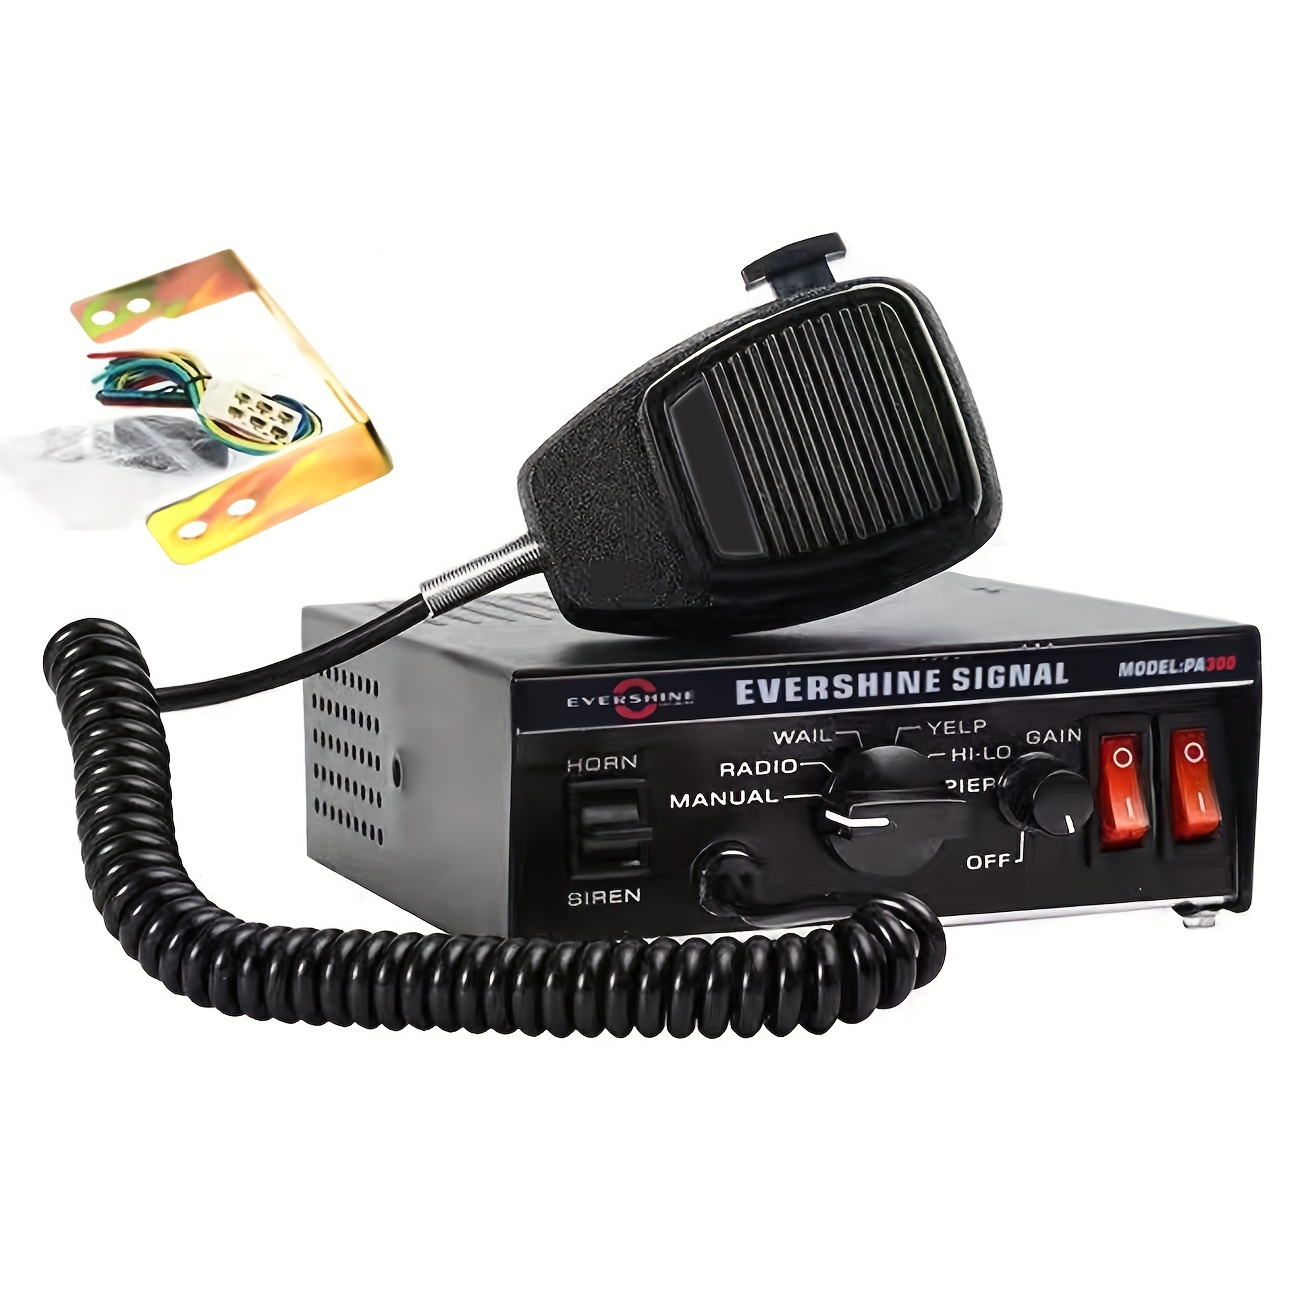 12V 200W Siren PA System with Handheld Microphone & Hands-Free 2X16A  Switches - Perfect for Emergency Warning Siren in Vehicles, Trucks, UTVs,  ATVs 